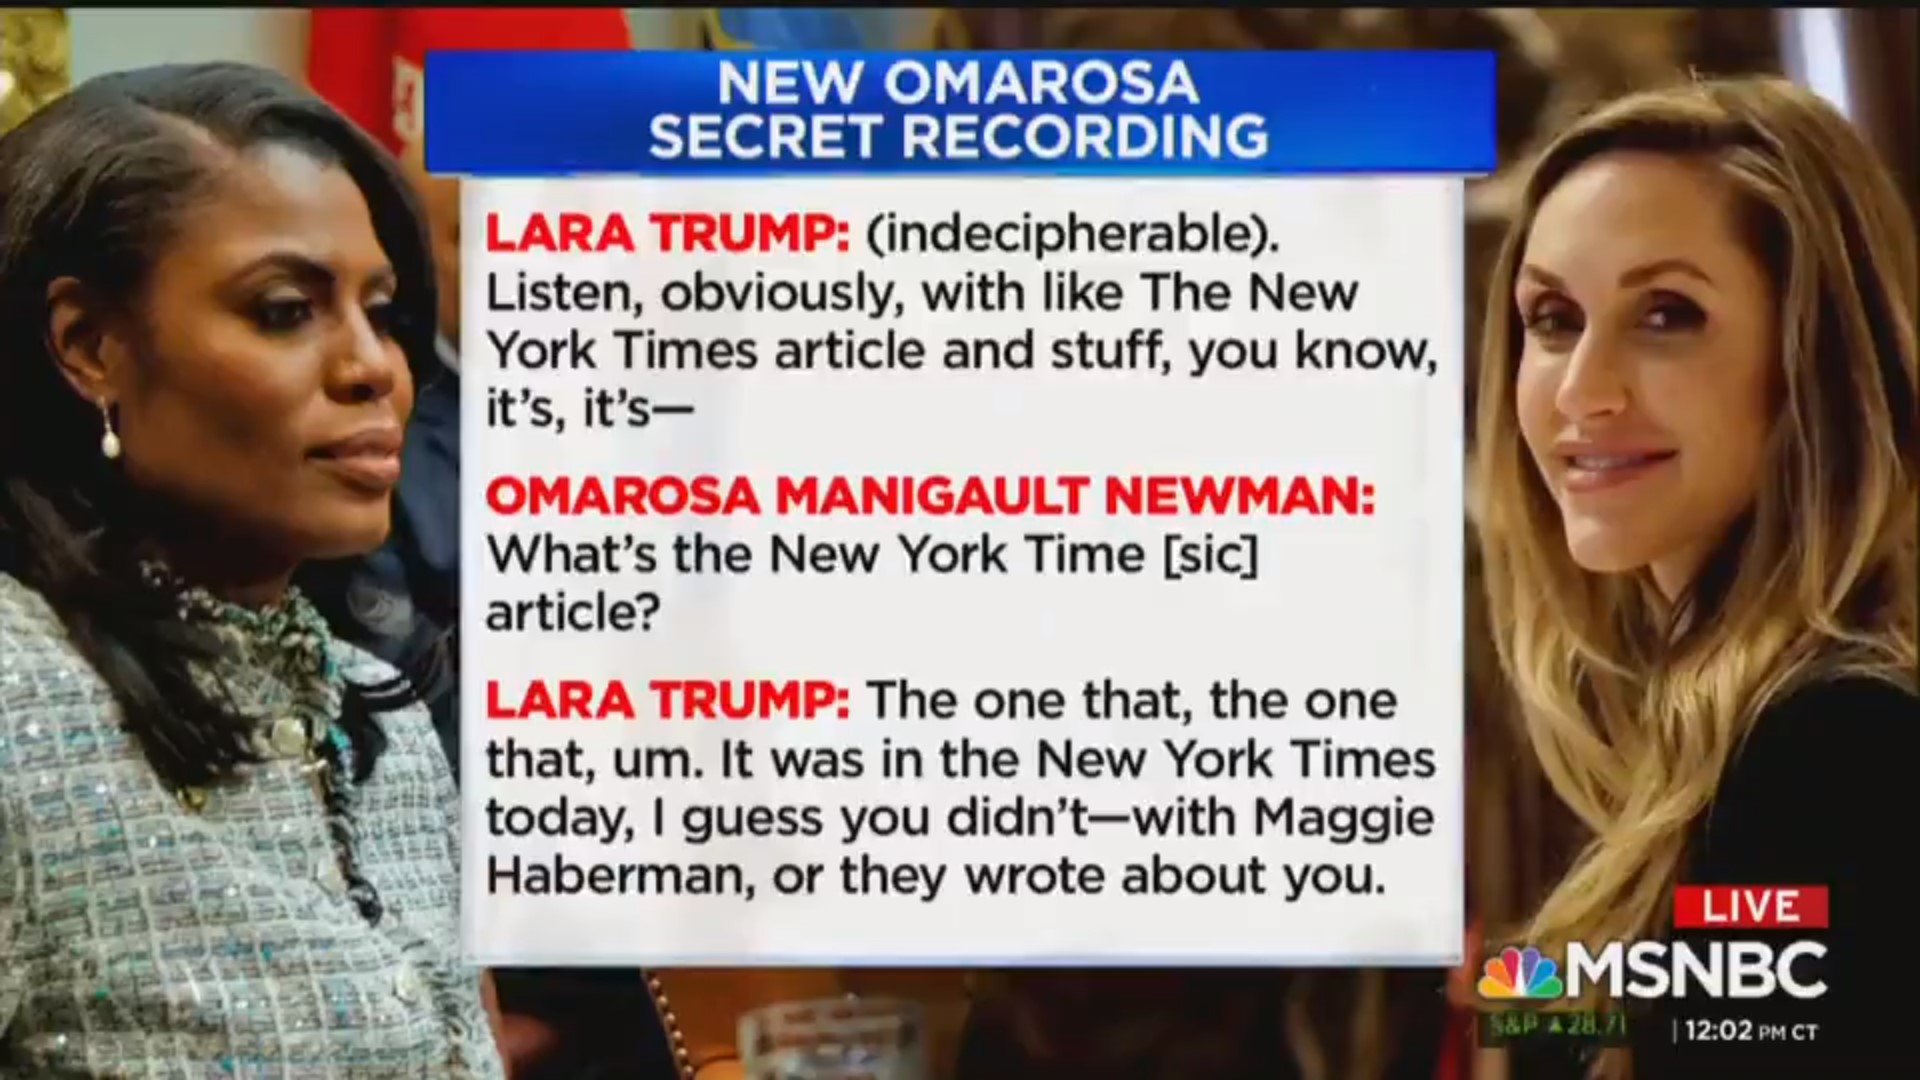 Lara Trump Reacts To Omarosa’s Latest Tape Release: ‘I Hope It’s All Worth It For You’